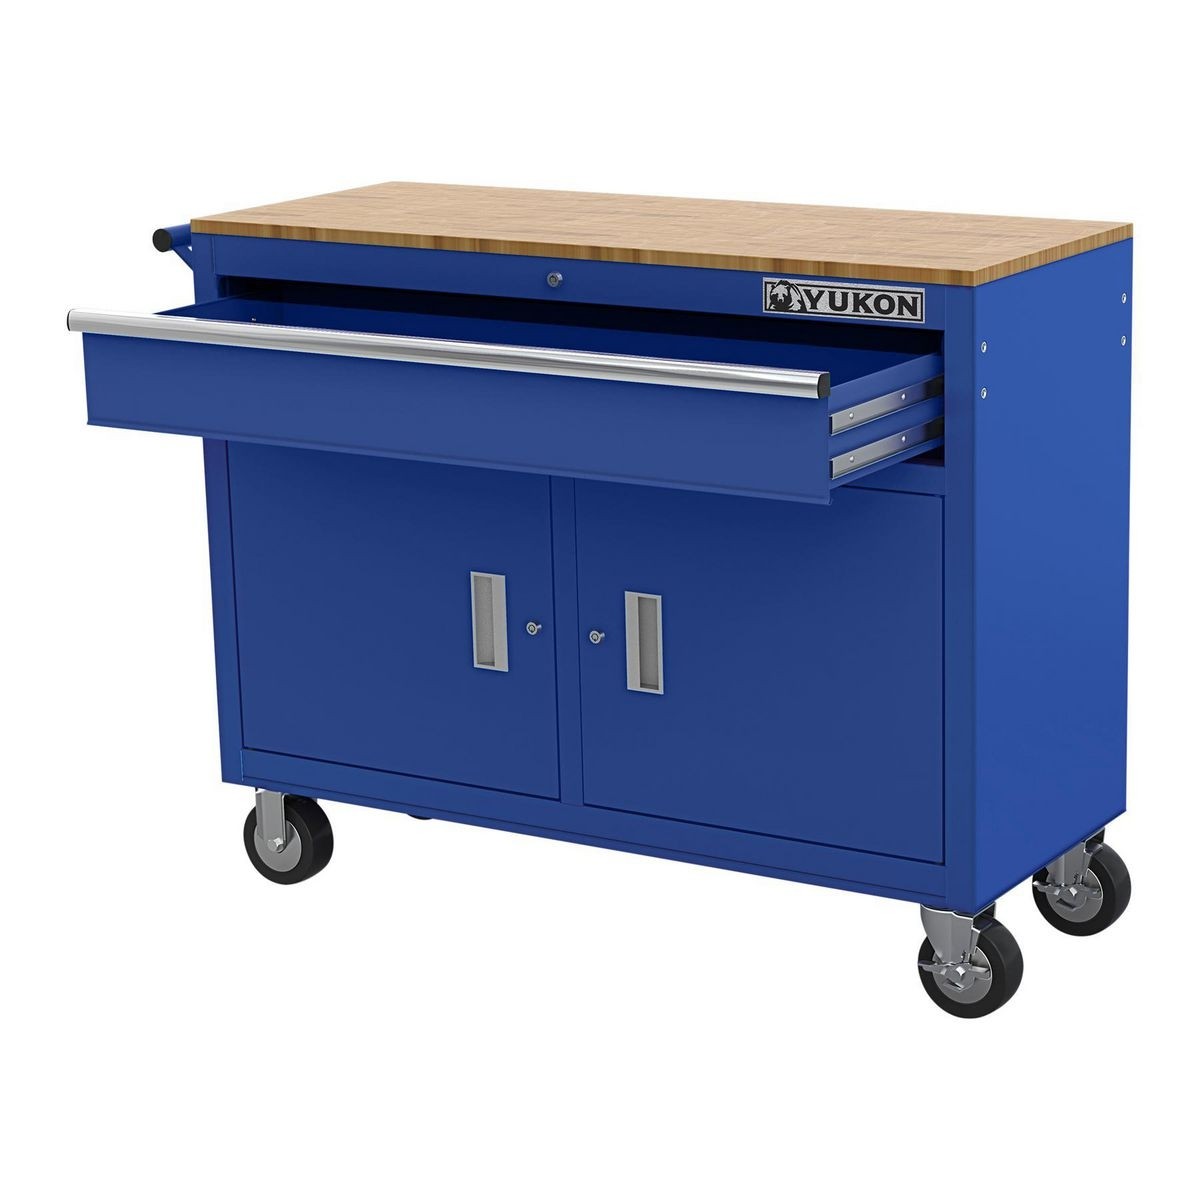 YUKON 46 In. Mobile Workbench With Solid Wood Top - Blue – Item 57780